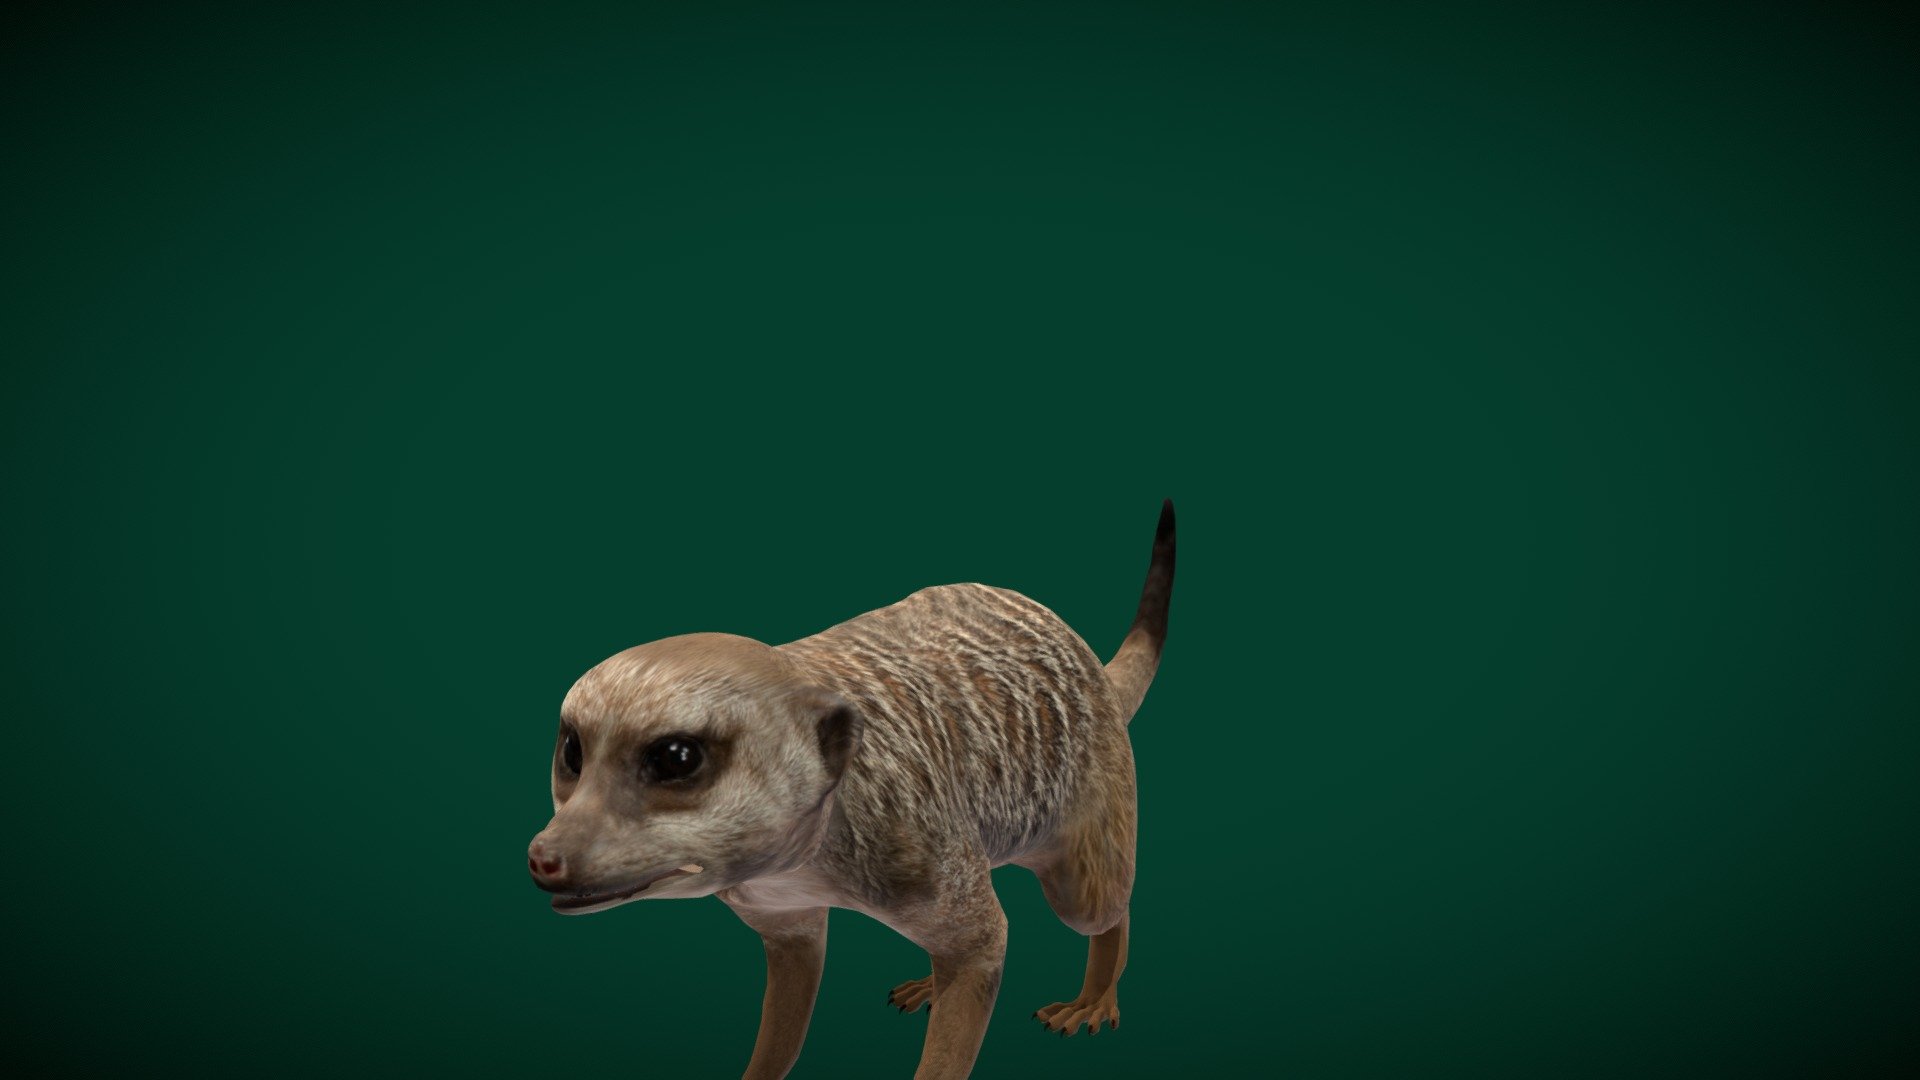 Slender-tailed meerkat(small mongoose ) Miller Park Zoo

Suricata suricatta Animal Mammal(Animalia) southern Africa

1 Draw Calls

Game Ready Asset

Subdivision Surface Ready

Single- Animations

4K PBR Textures Material

Unreal FBX (Unreal 4,5 Plus)

Unity FBX

Blend File 3.6.5 LTS

USDZ File (AR Ready). Real Scale Dimension (Xcode ,Reality Composer, Keynote Ready)

Textures Files

GLB File (Unreal 5.1 Plus Native Support)


Gltf File ( Spark AR, Lens Studio(SnapChat) , Effector(Tiktok) , Spline, Play Canvas,Omiverse ) Compatible




Triangles -17463  



Faces -9243

Edges -17989

Vertices -8800

Diffuse, Metallic, Roughness , Normal Map ,Specular Map,AO

A slender-tailed meerkat (Suricata suricatta) at the Miller Park Zoo.
The meerkat or suricate is a small mongoose found in southern Africa. characterised by a broad head, large eyes, a pointed snout, long legs, a thin tapering tail, a brindled coat pattern. head-and-body length is around 24–35 cm, the weight is  between 0.62 and 0.97 kg 3d model